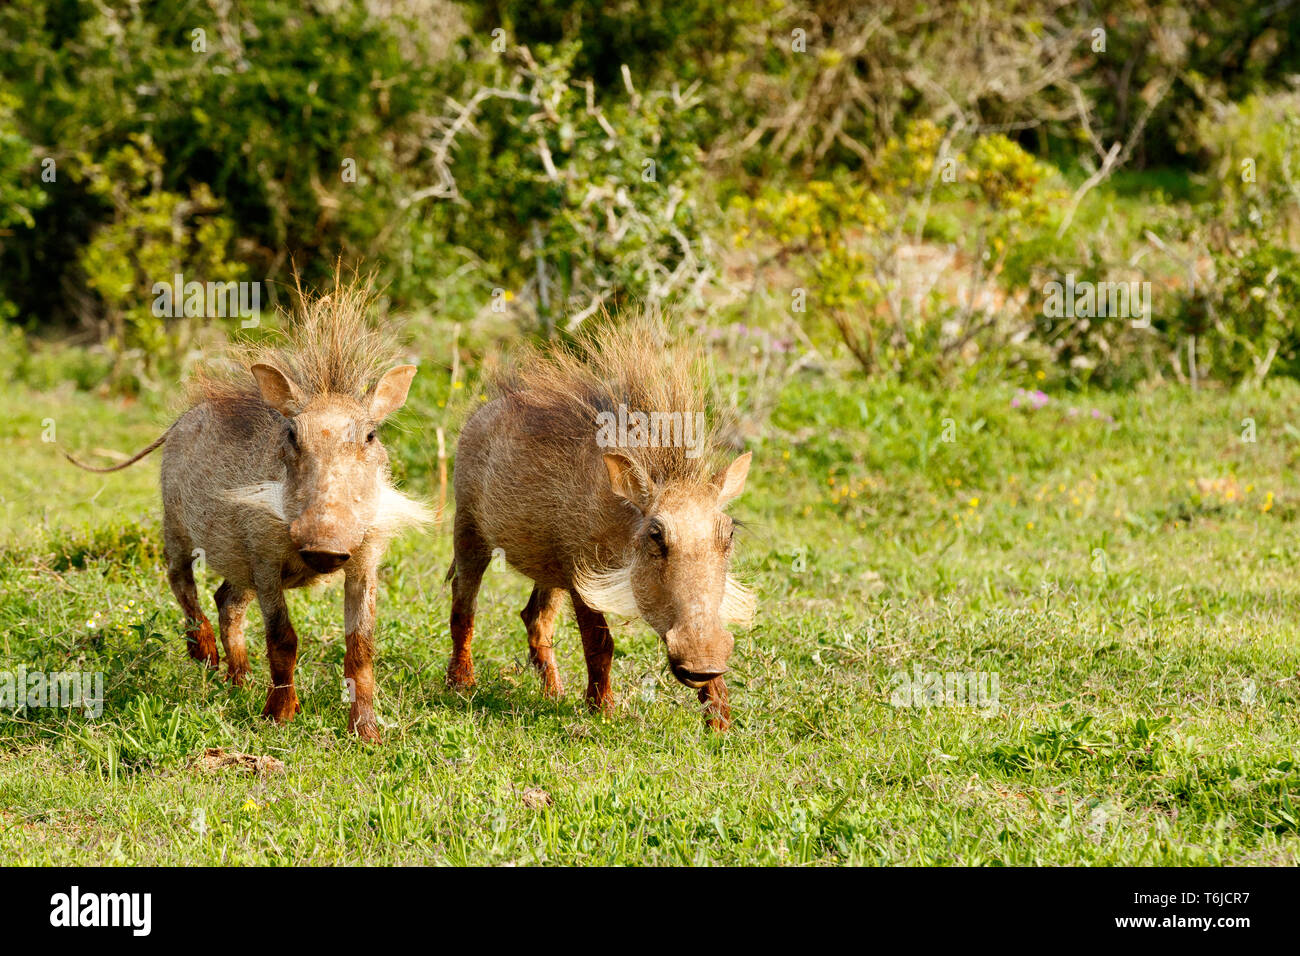 Warthogs standing with their punk hairstyles Stock Photo